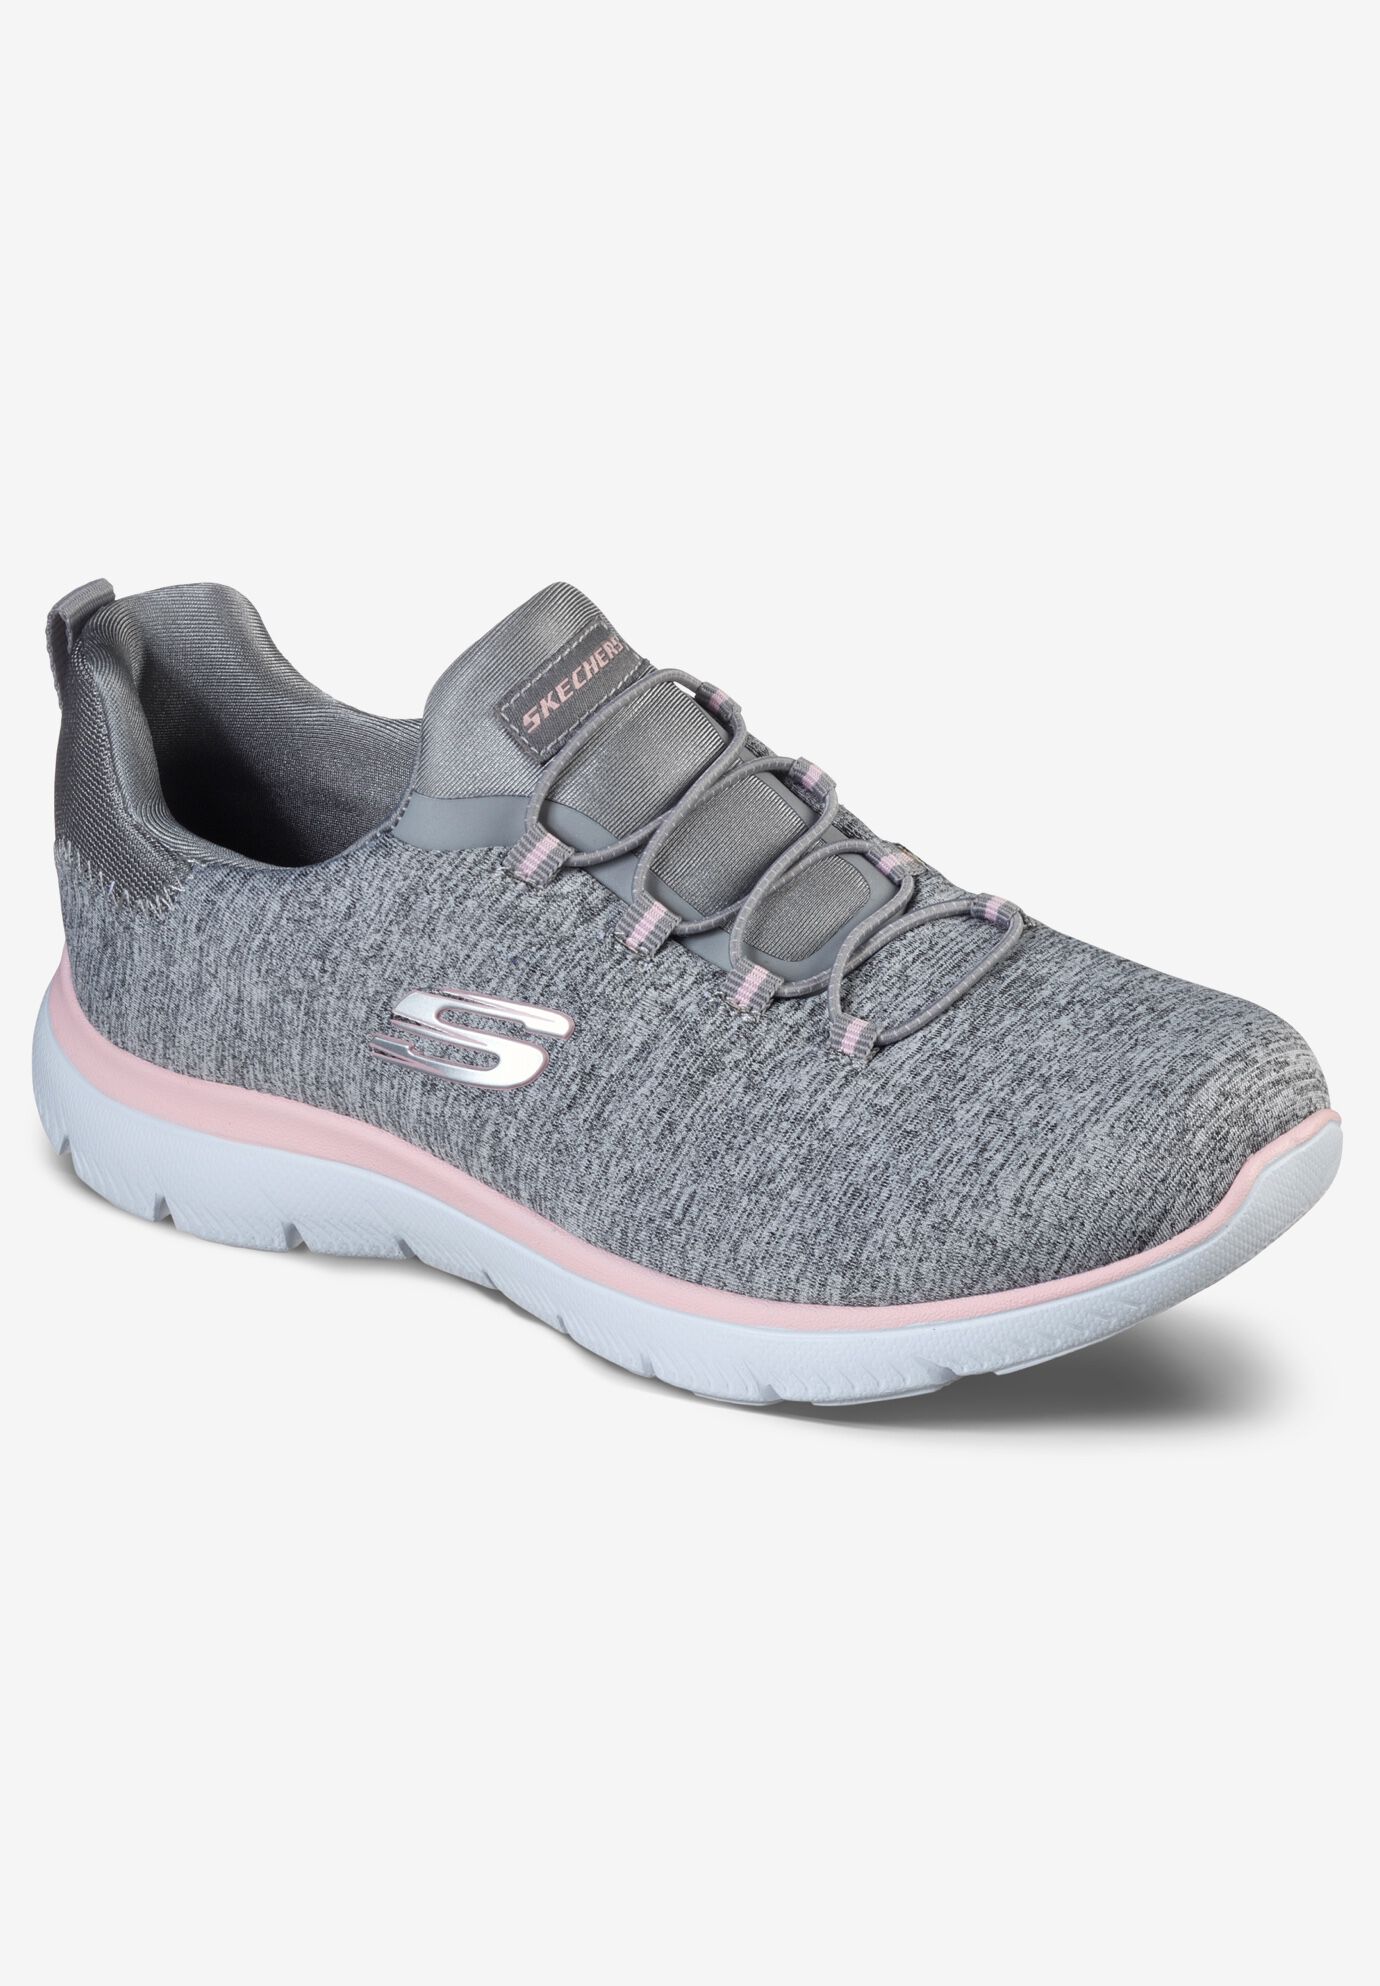 where can i buy skechers wide fit shoes